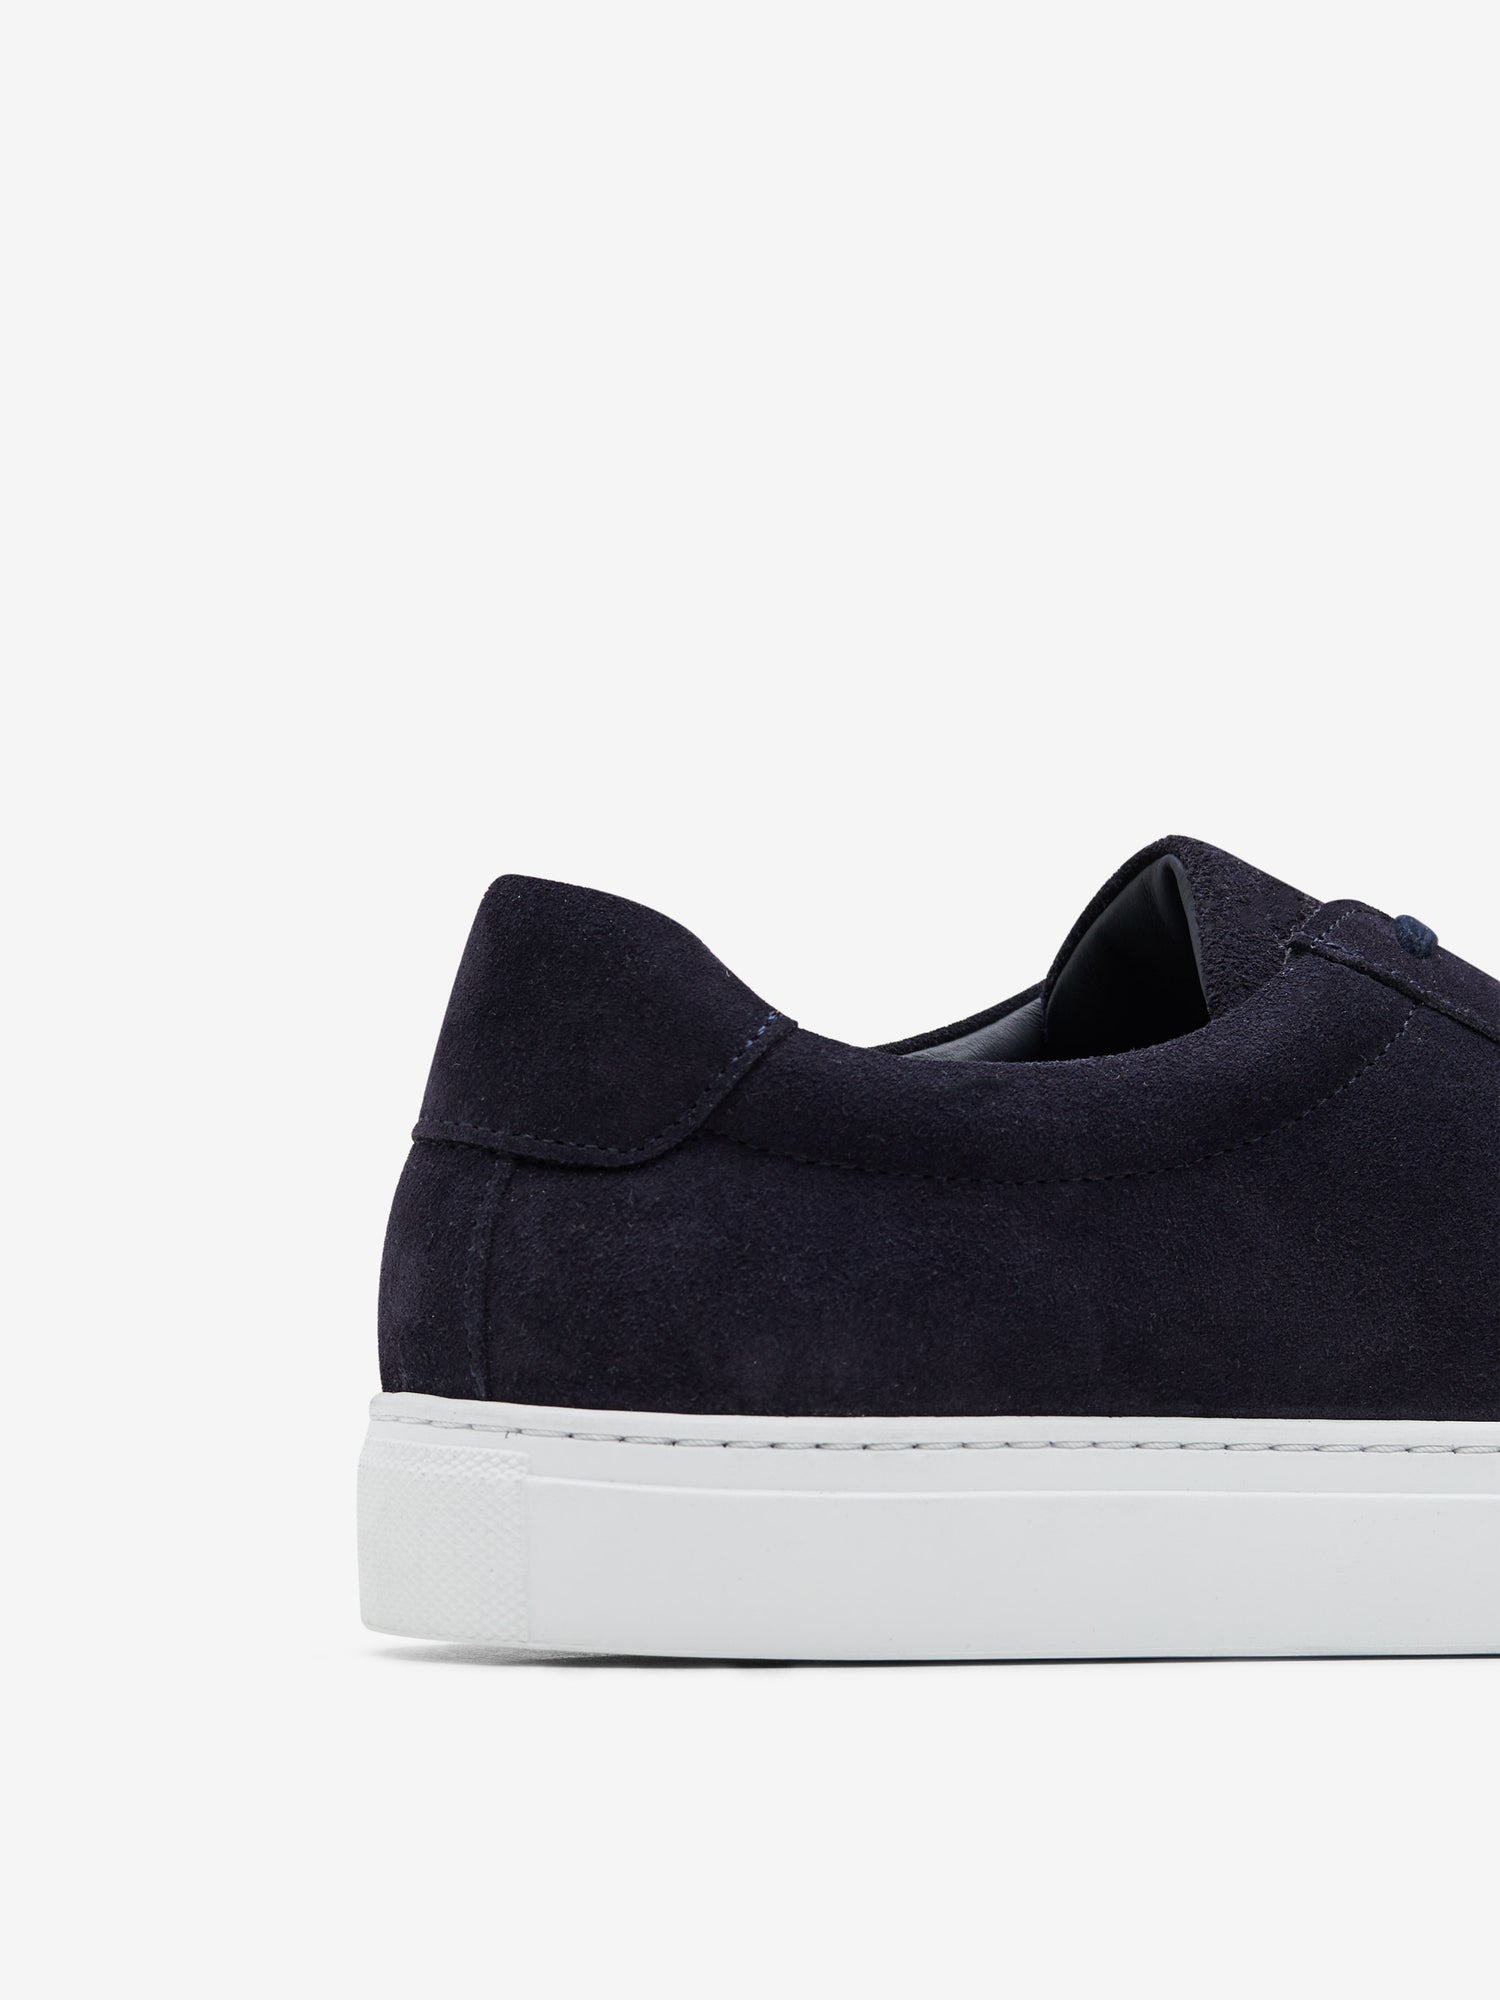 Dundee Suede FW00071-NVY